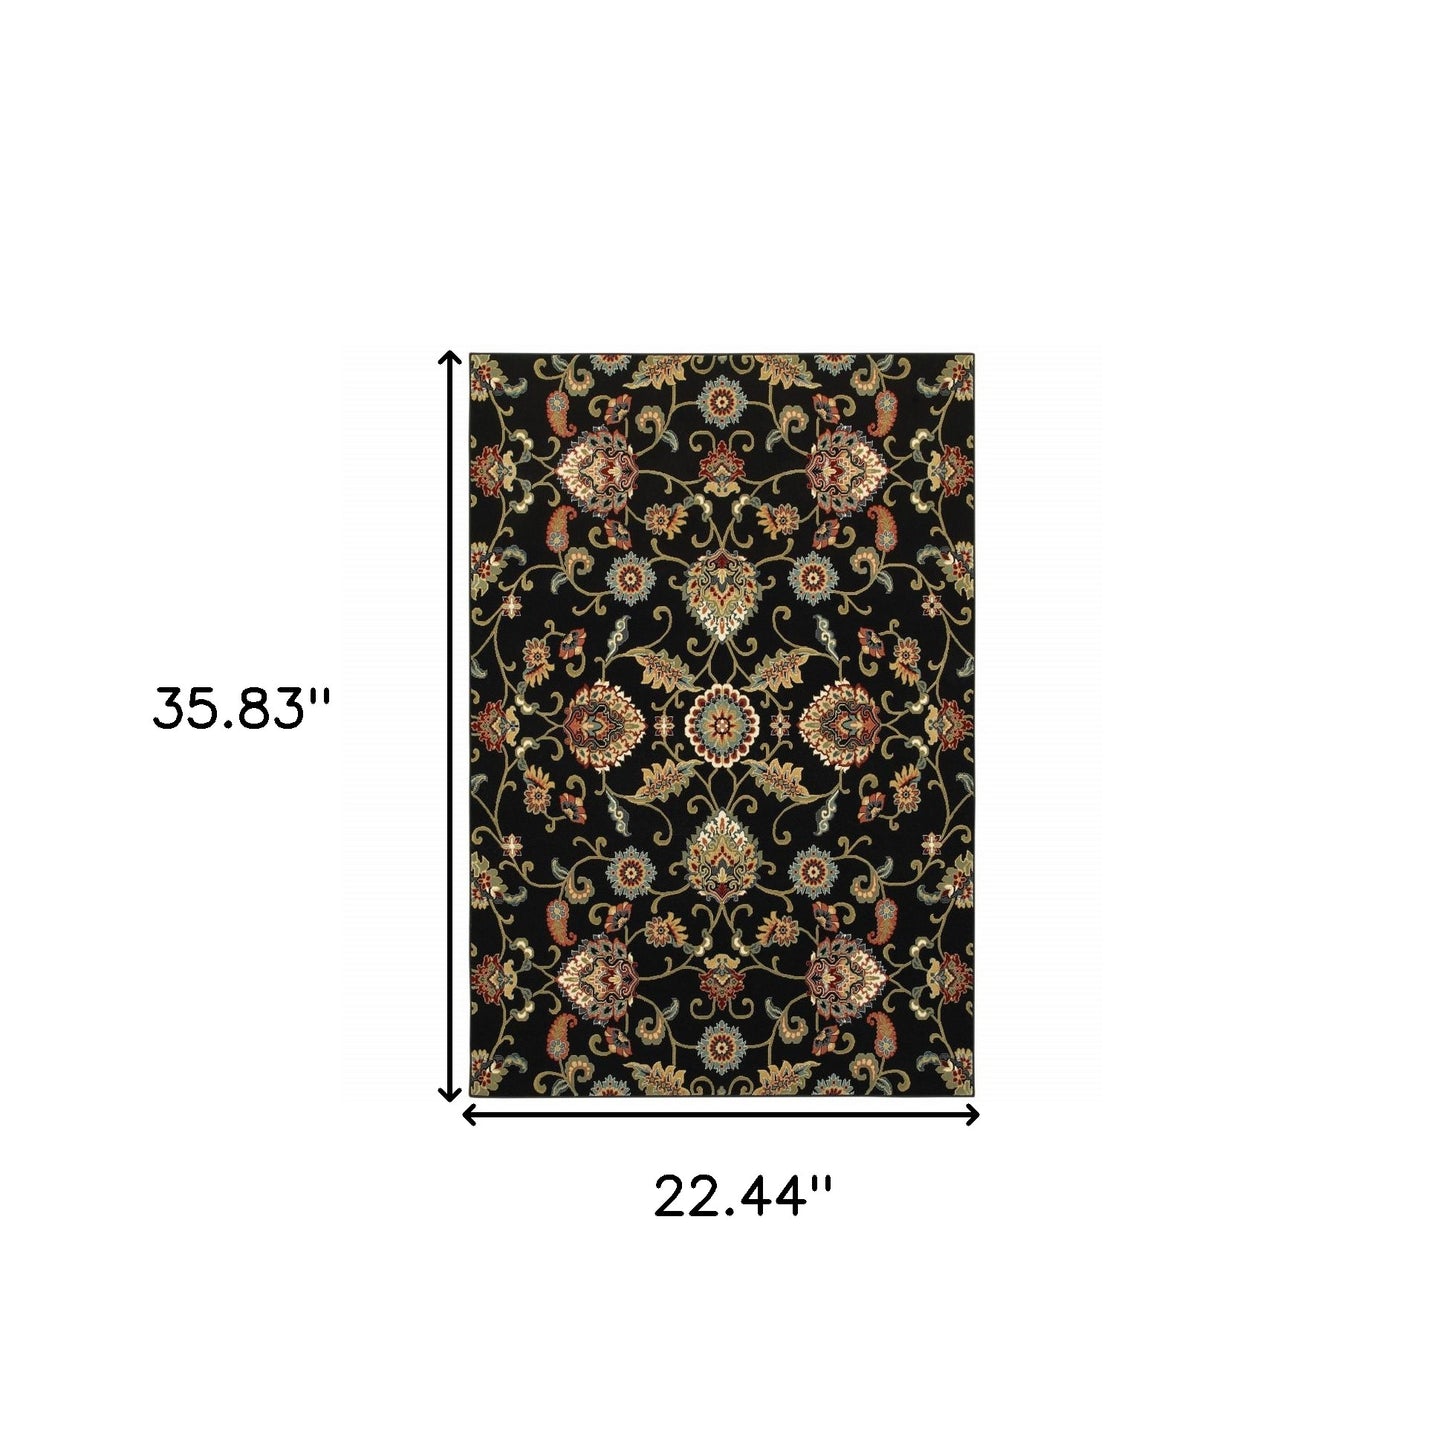 2' X 4' Green and Black Floral Power Loom Area Rug